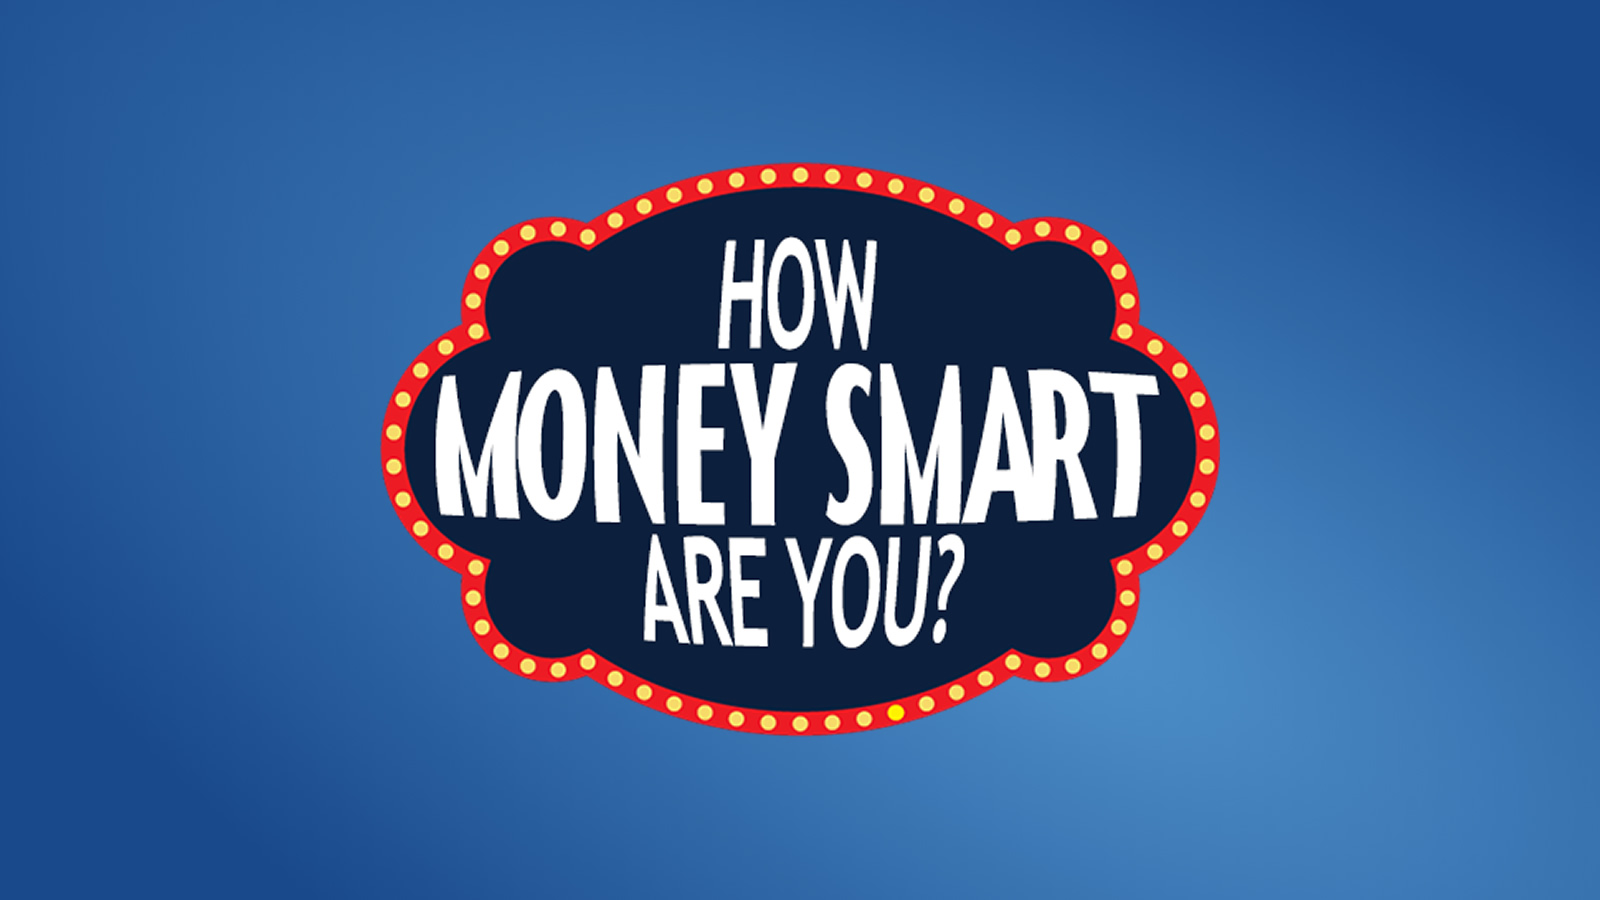 The FDIC recently debuted the Play Money Smart site, an online depository of 14 games about everyday financial topics. It is based on the FDIC’s award-winning Money Smart program. Game categories include EARN, SPEND, SAVE, BORROW and PROTECT.